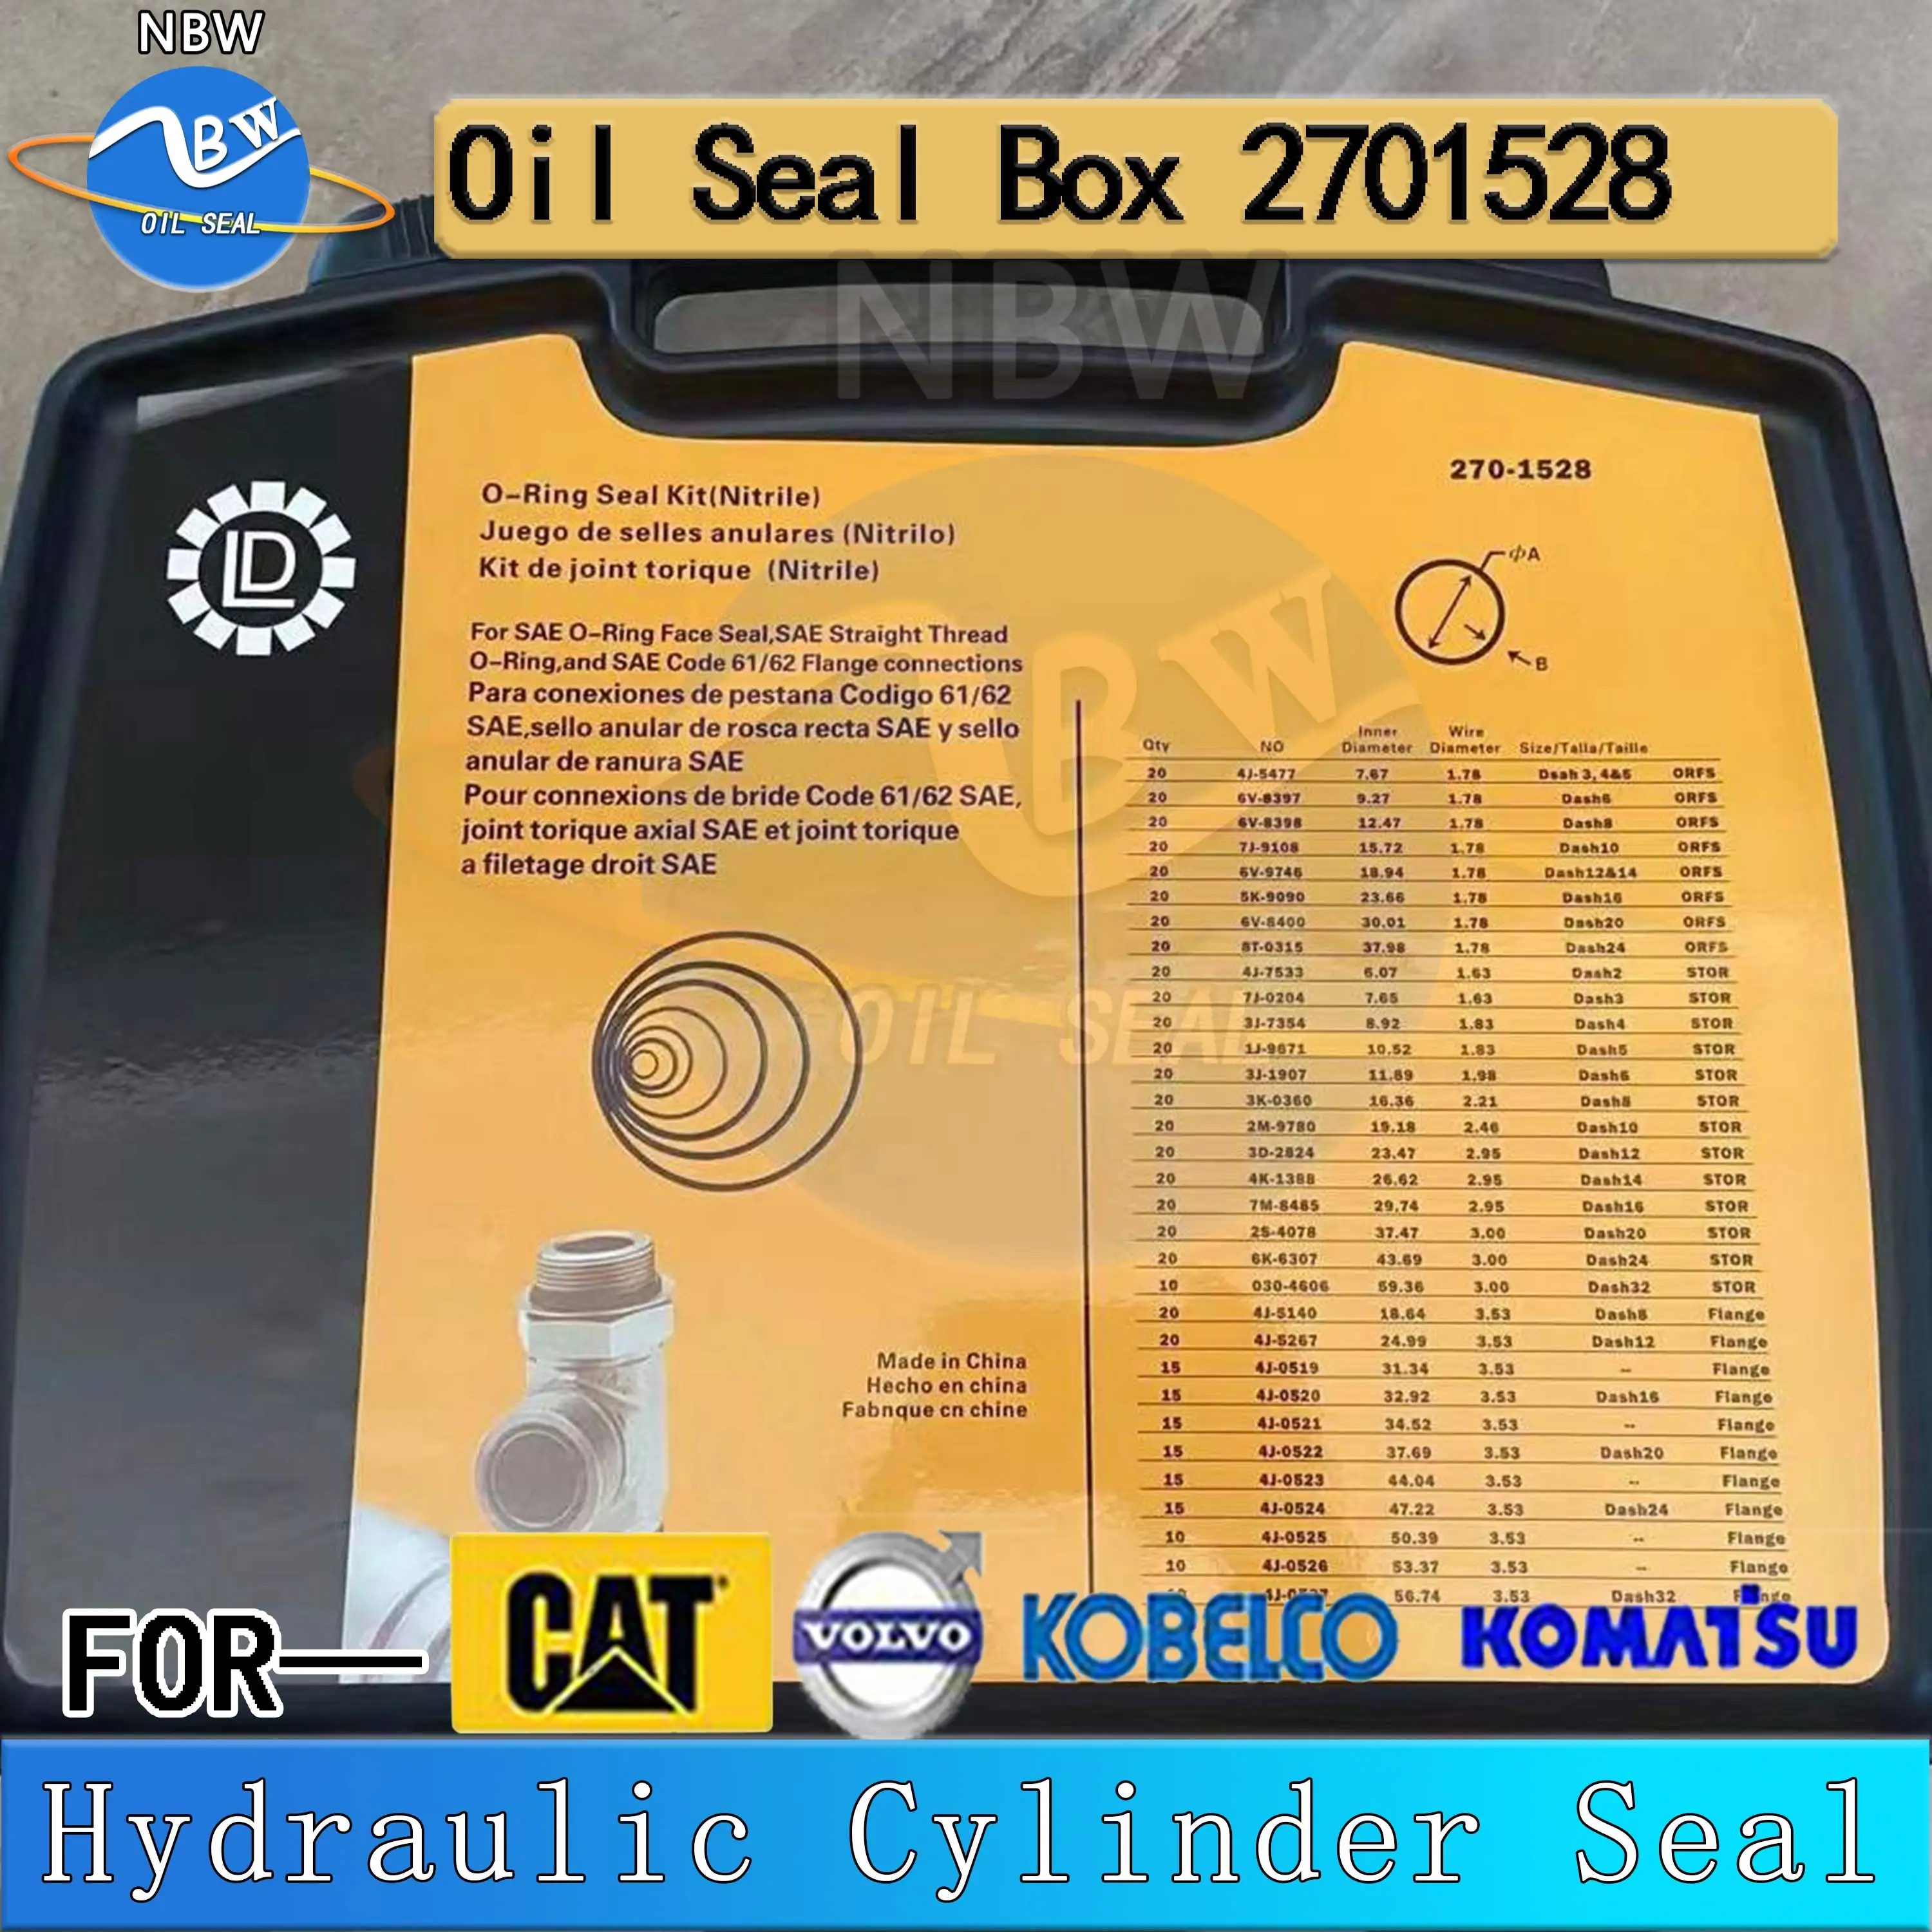 

270-1528 - Oil Seal Box 4C-4782 Excavator Hydraulic Cylinder Repair Kits For Caterpillar CAT Nitrile Rubber Gaske 4C4782 2701528